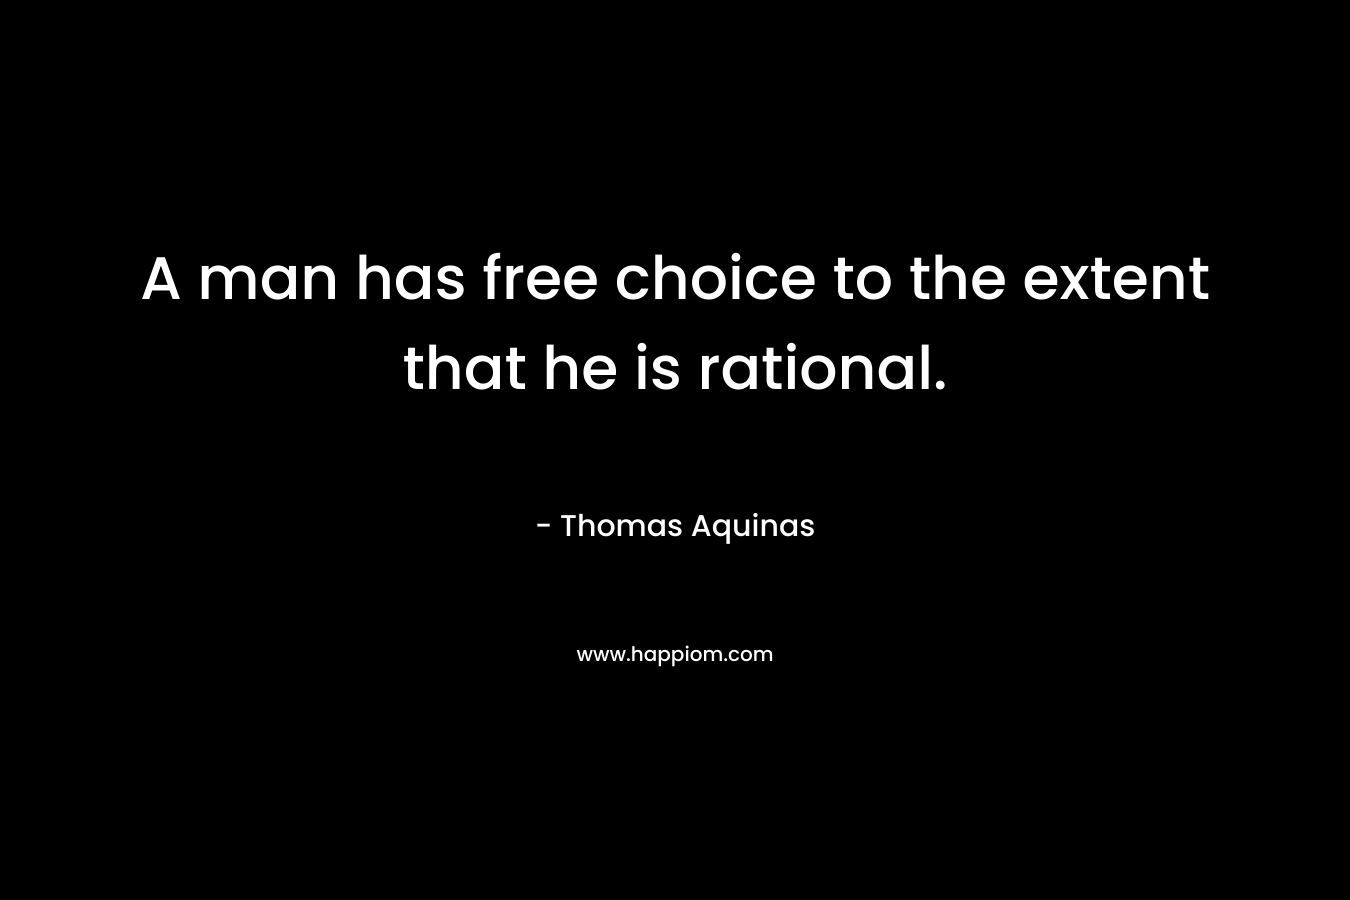 A man has free choice to the extent that he is rational. – Thomas Aquinas